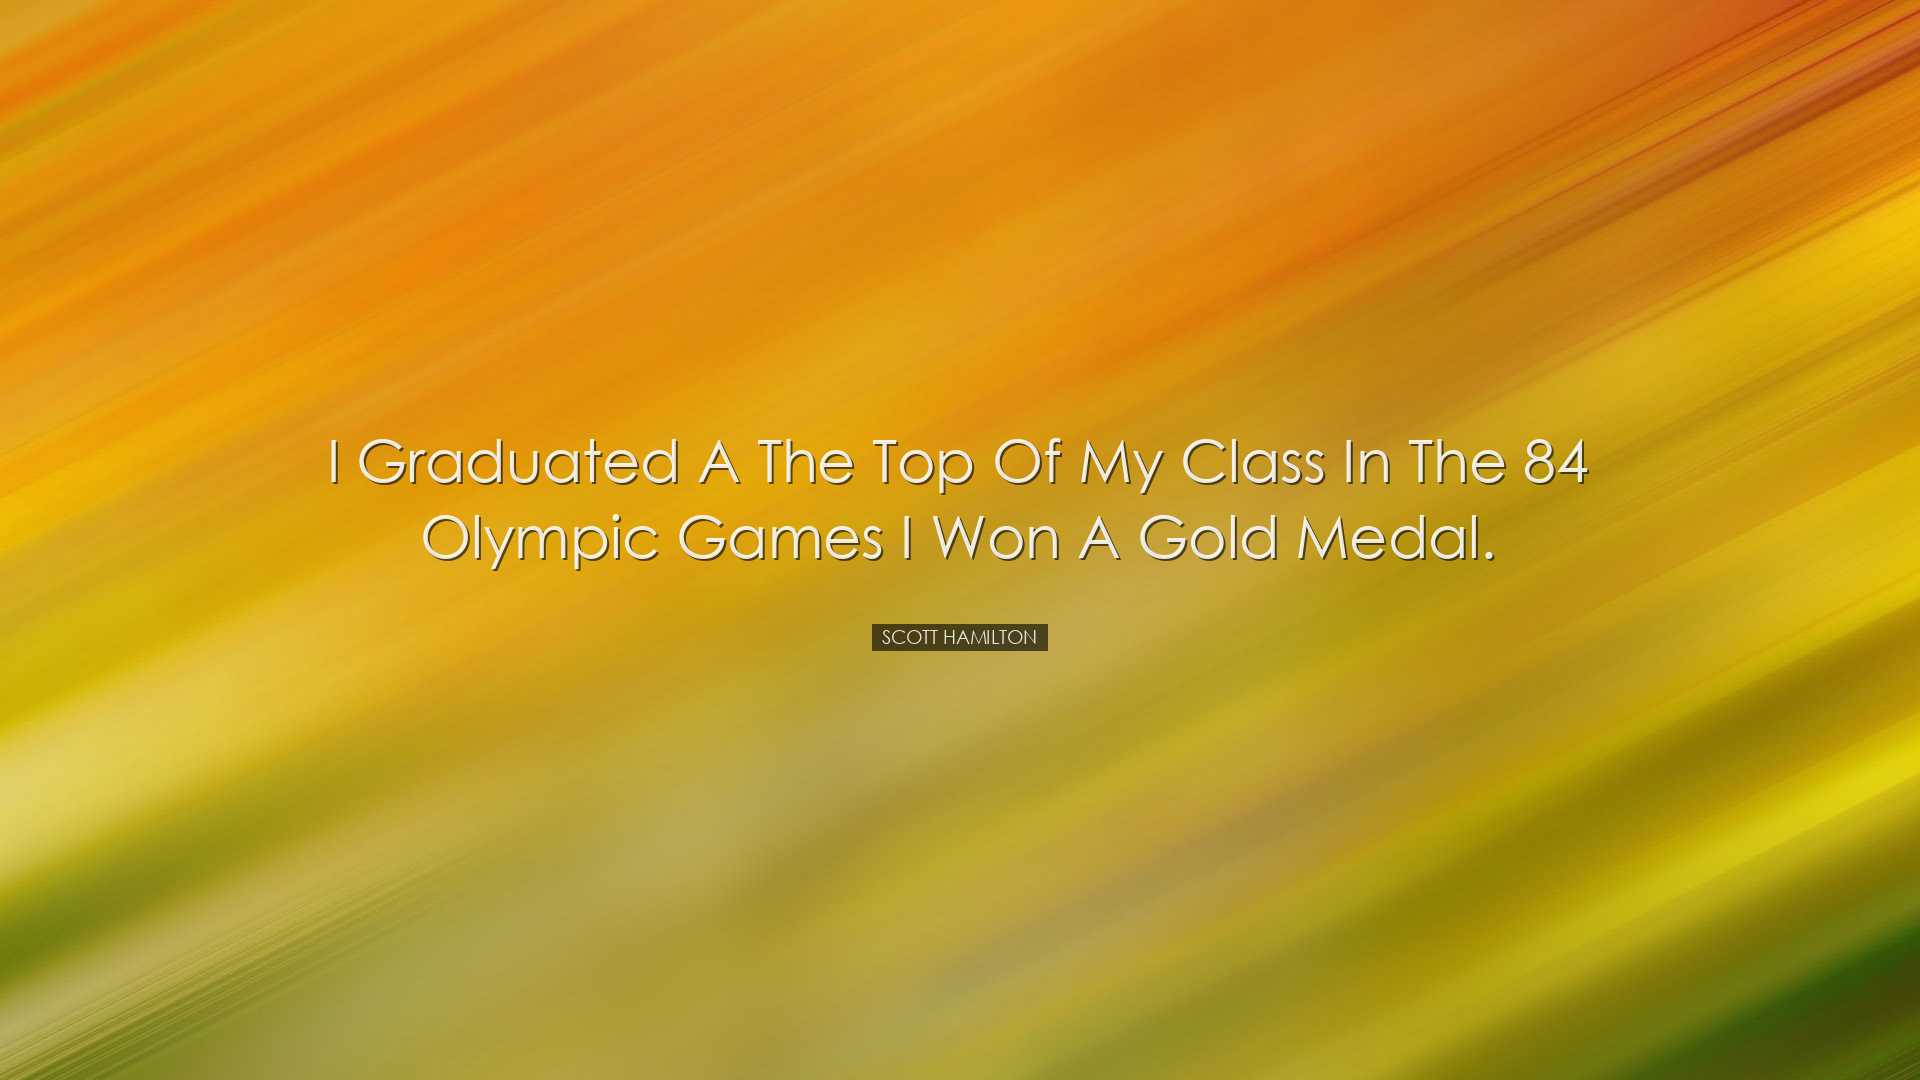 I graduated a the top of my class in the 84 Olympic Games I won a